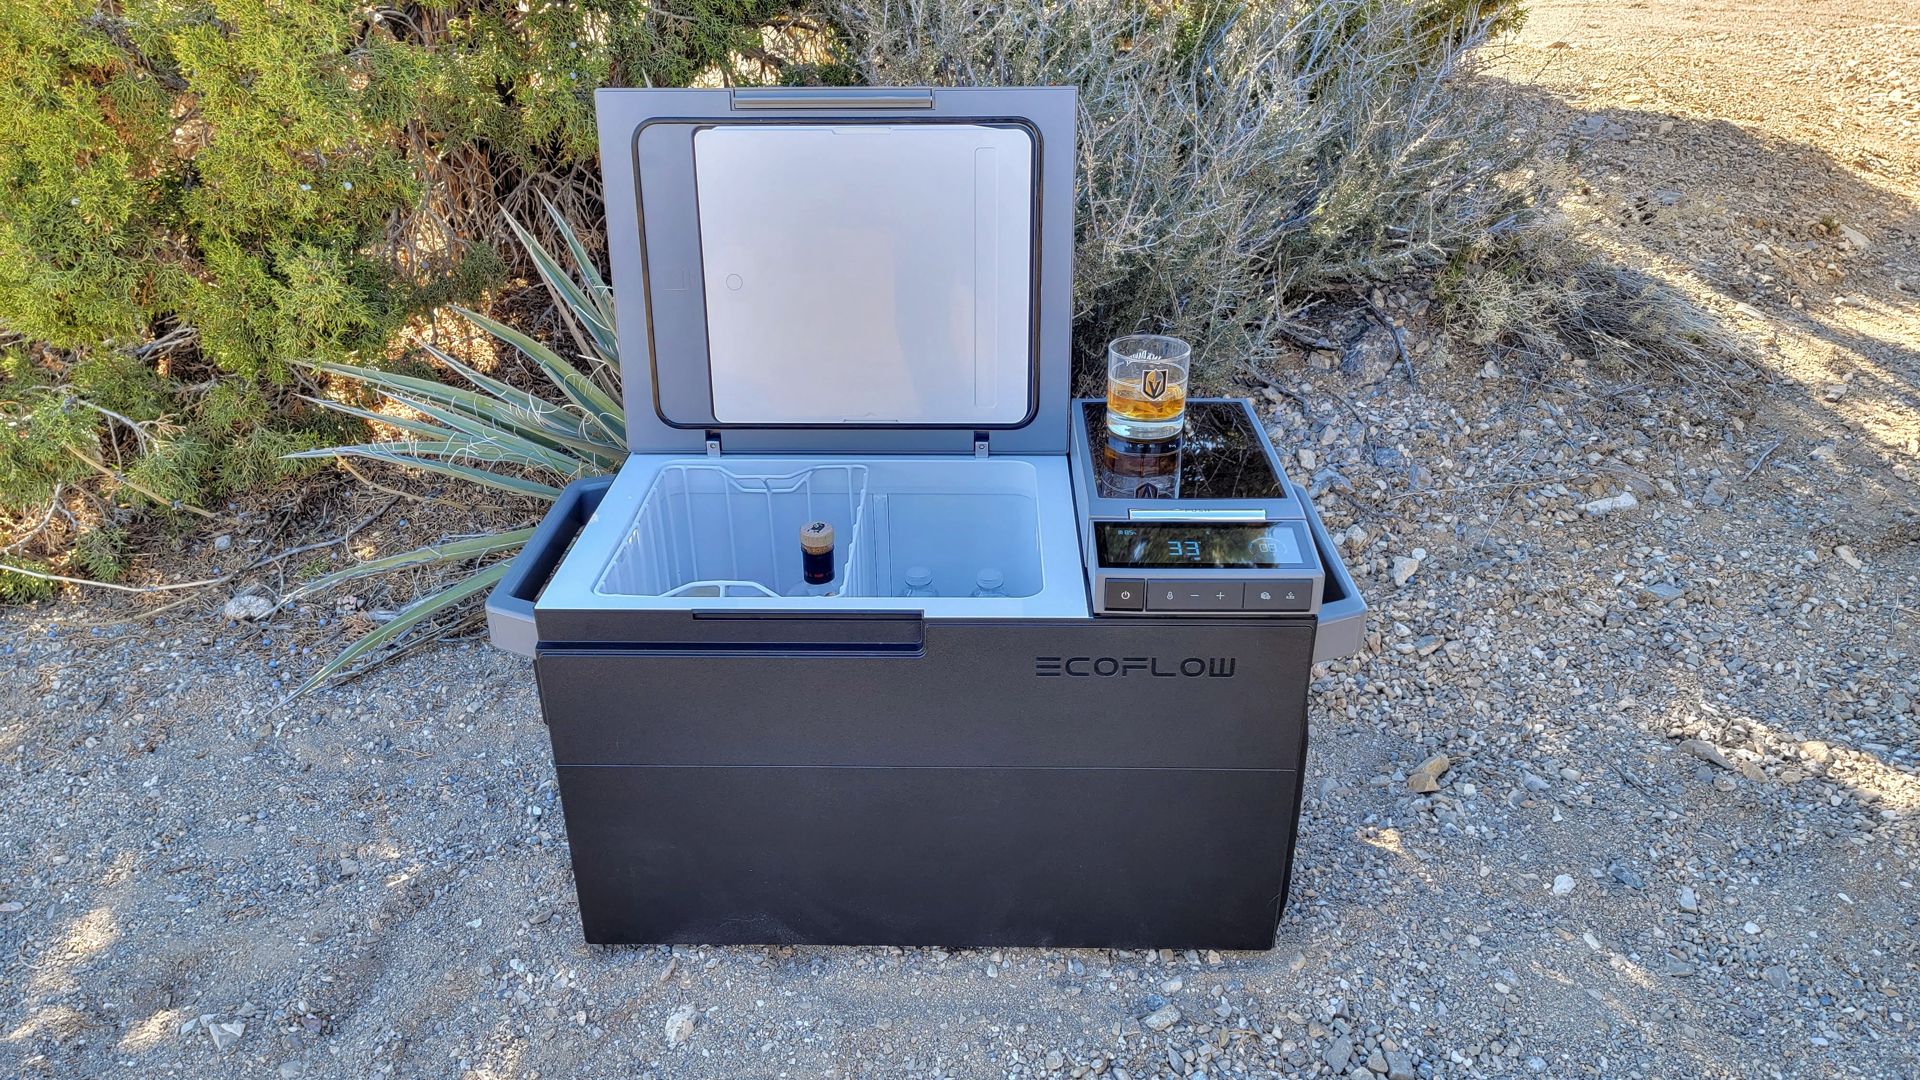 EcoFlow Glacier fridge opened with a drink on top.